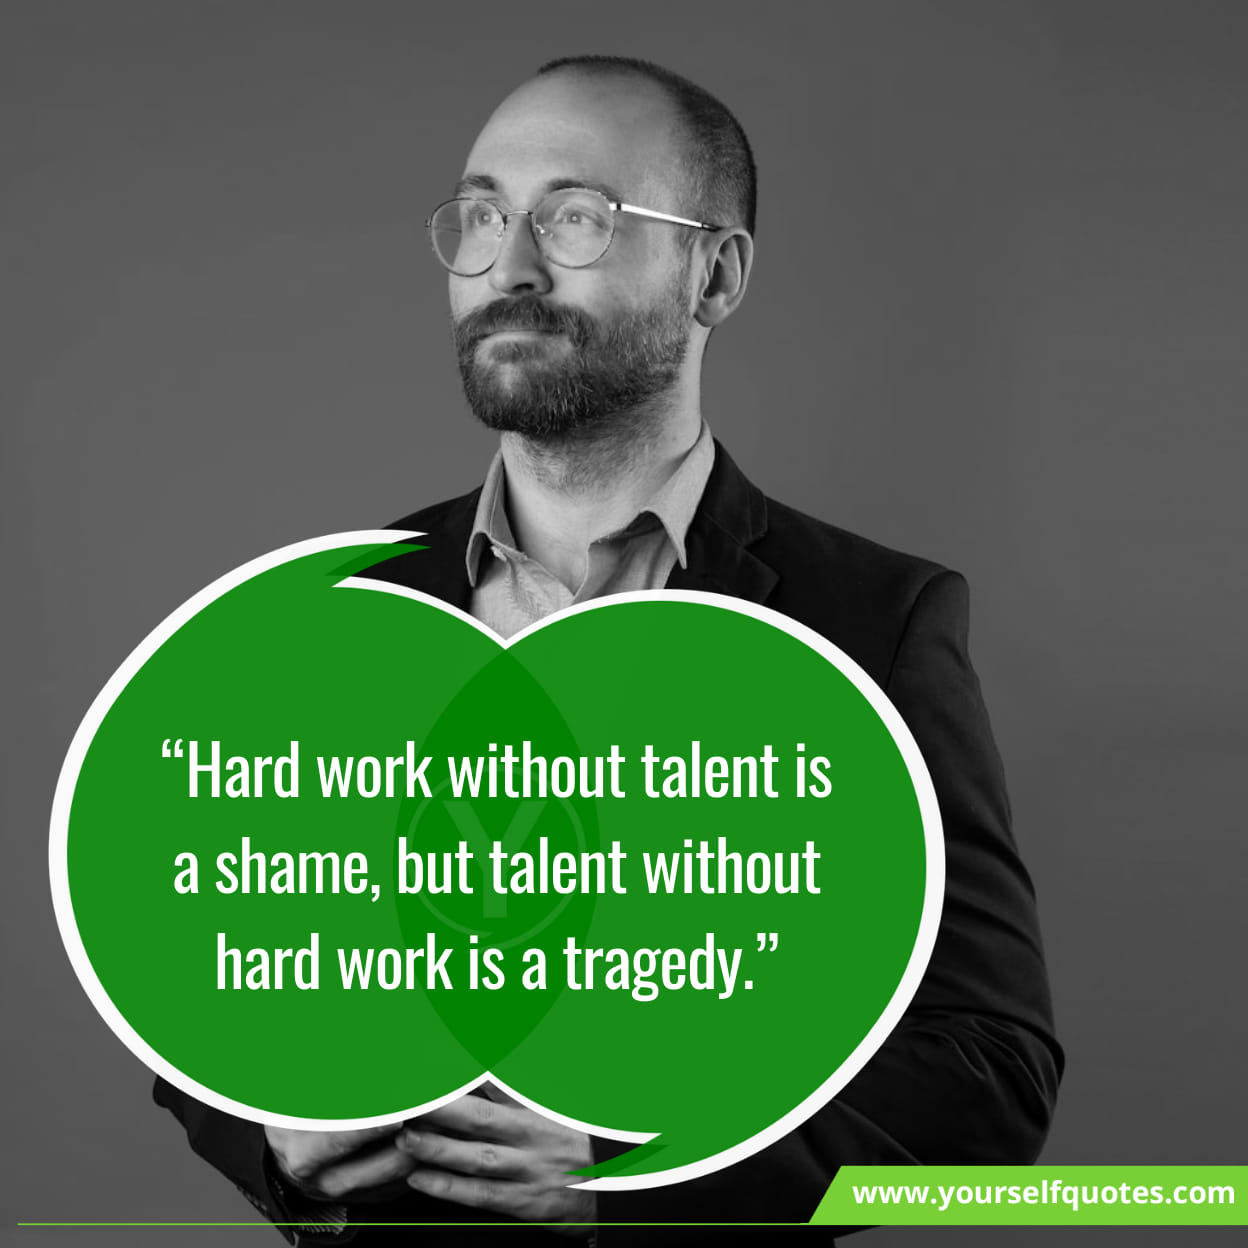 Inspirational Hard Work Quotes To Work Hard